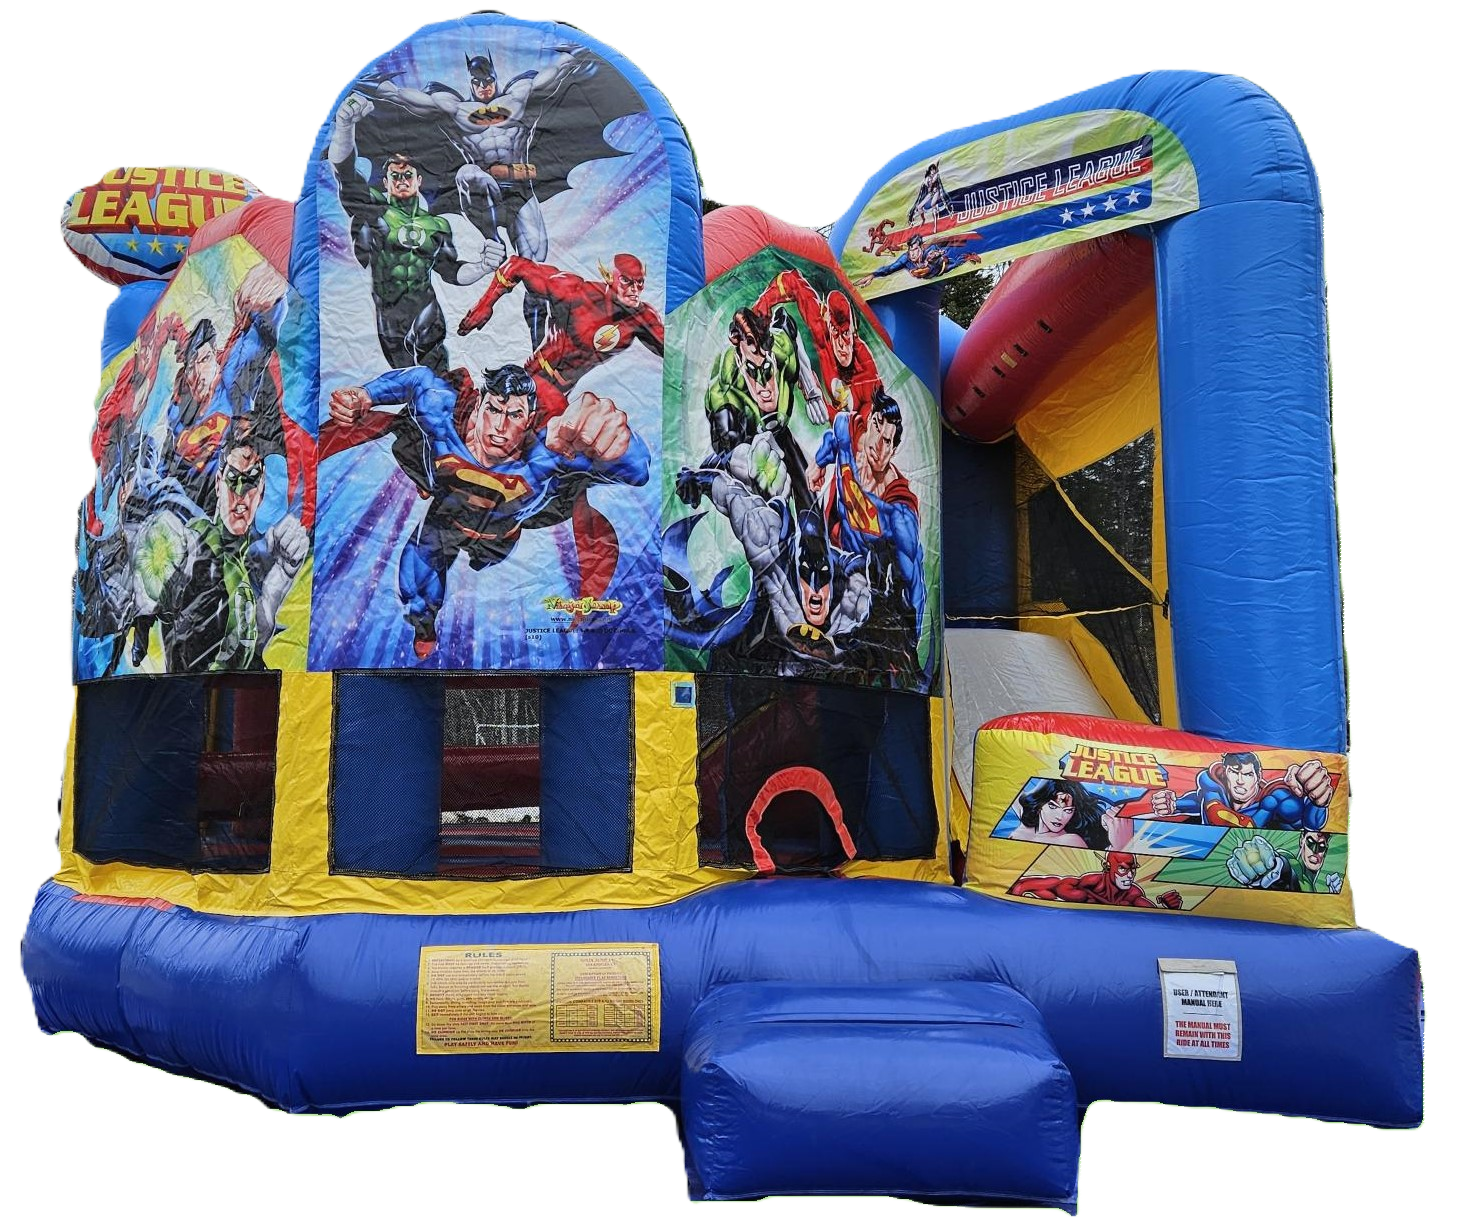 Large Justice League 5 in 1 Combo Bounce House BC2